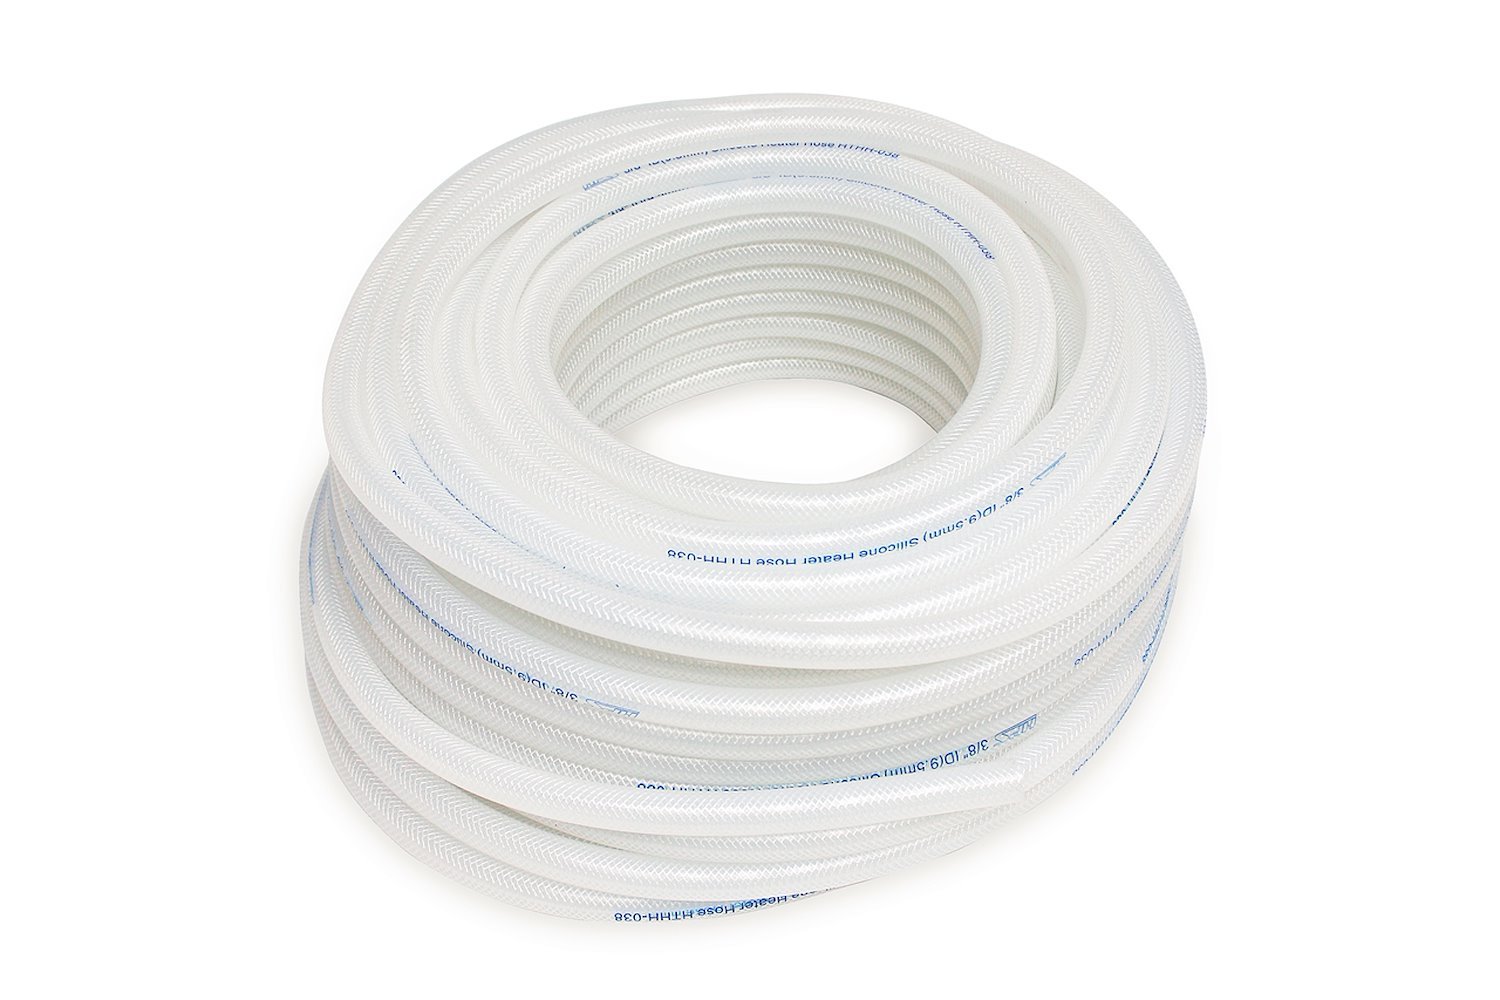 HTHH-016-CLEARx50 Silicone Heater Hose Tubing, High-Temp Reinforced, 5/32 in. ID, 50 ft. Roll, Clear